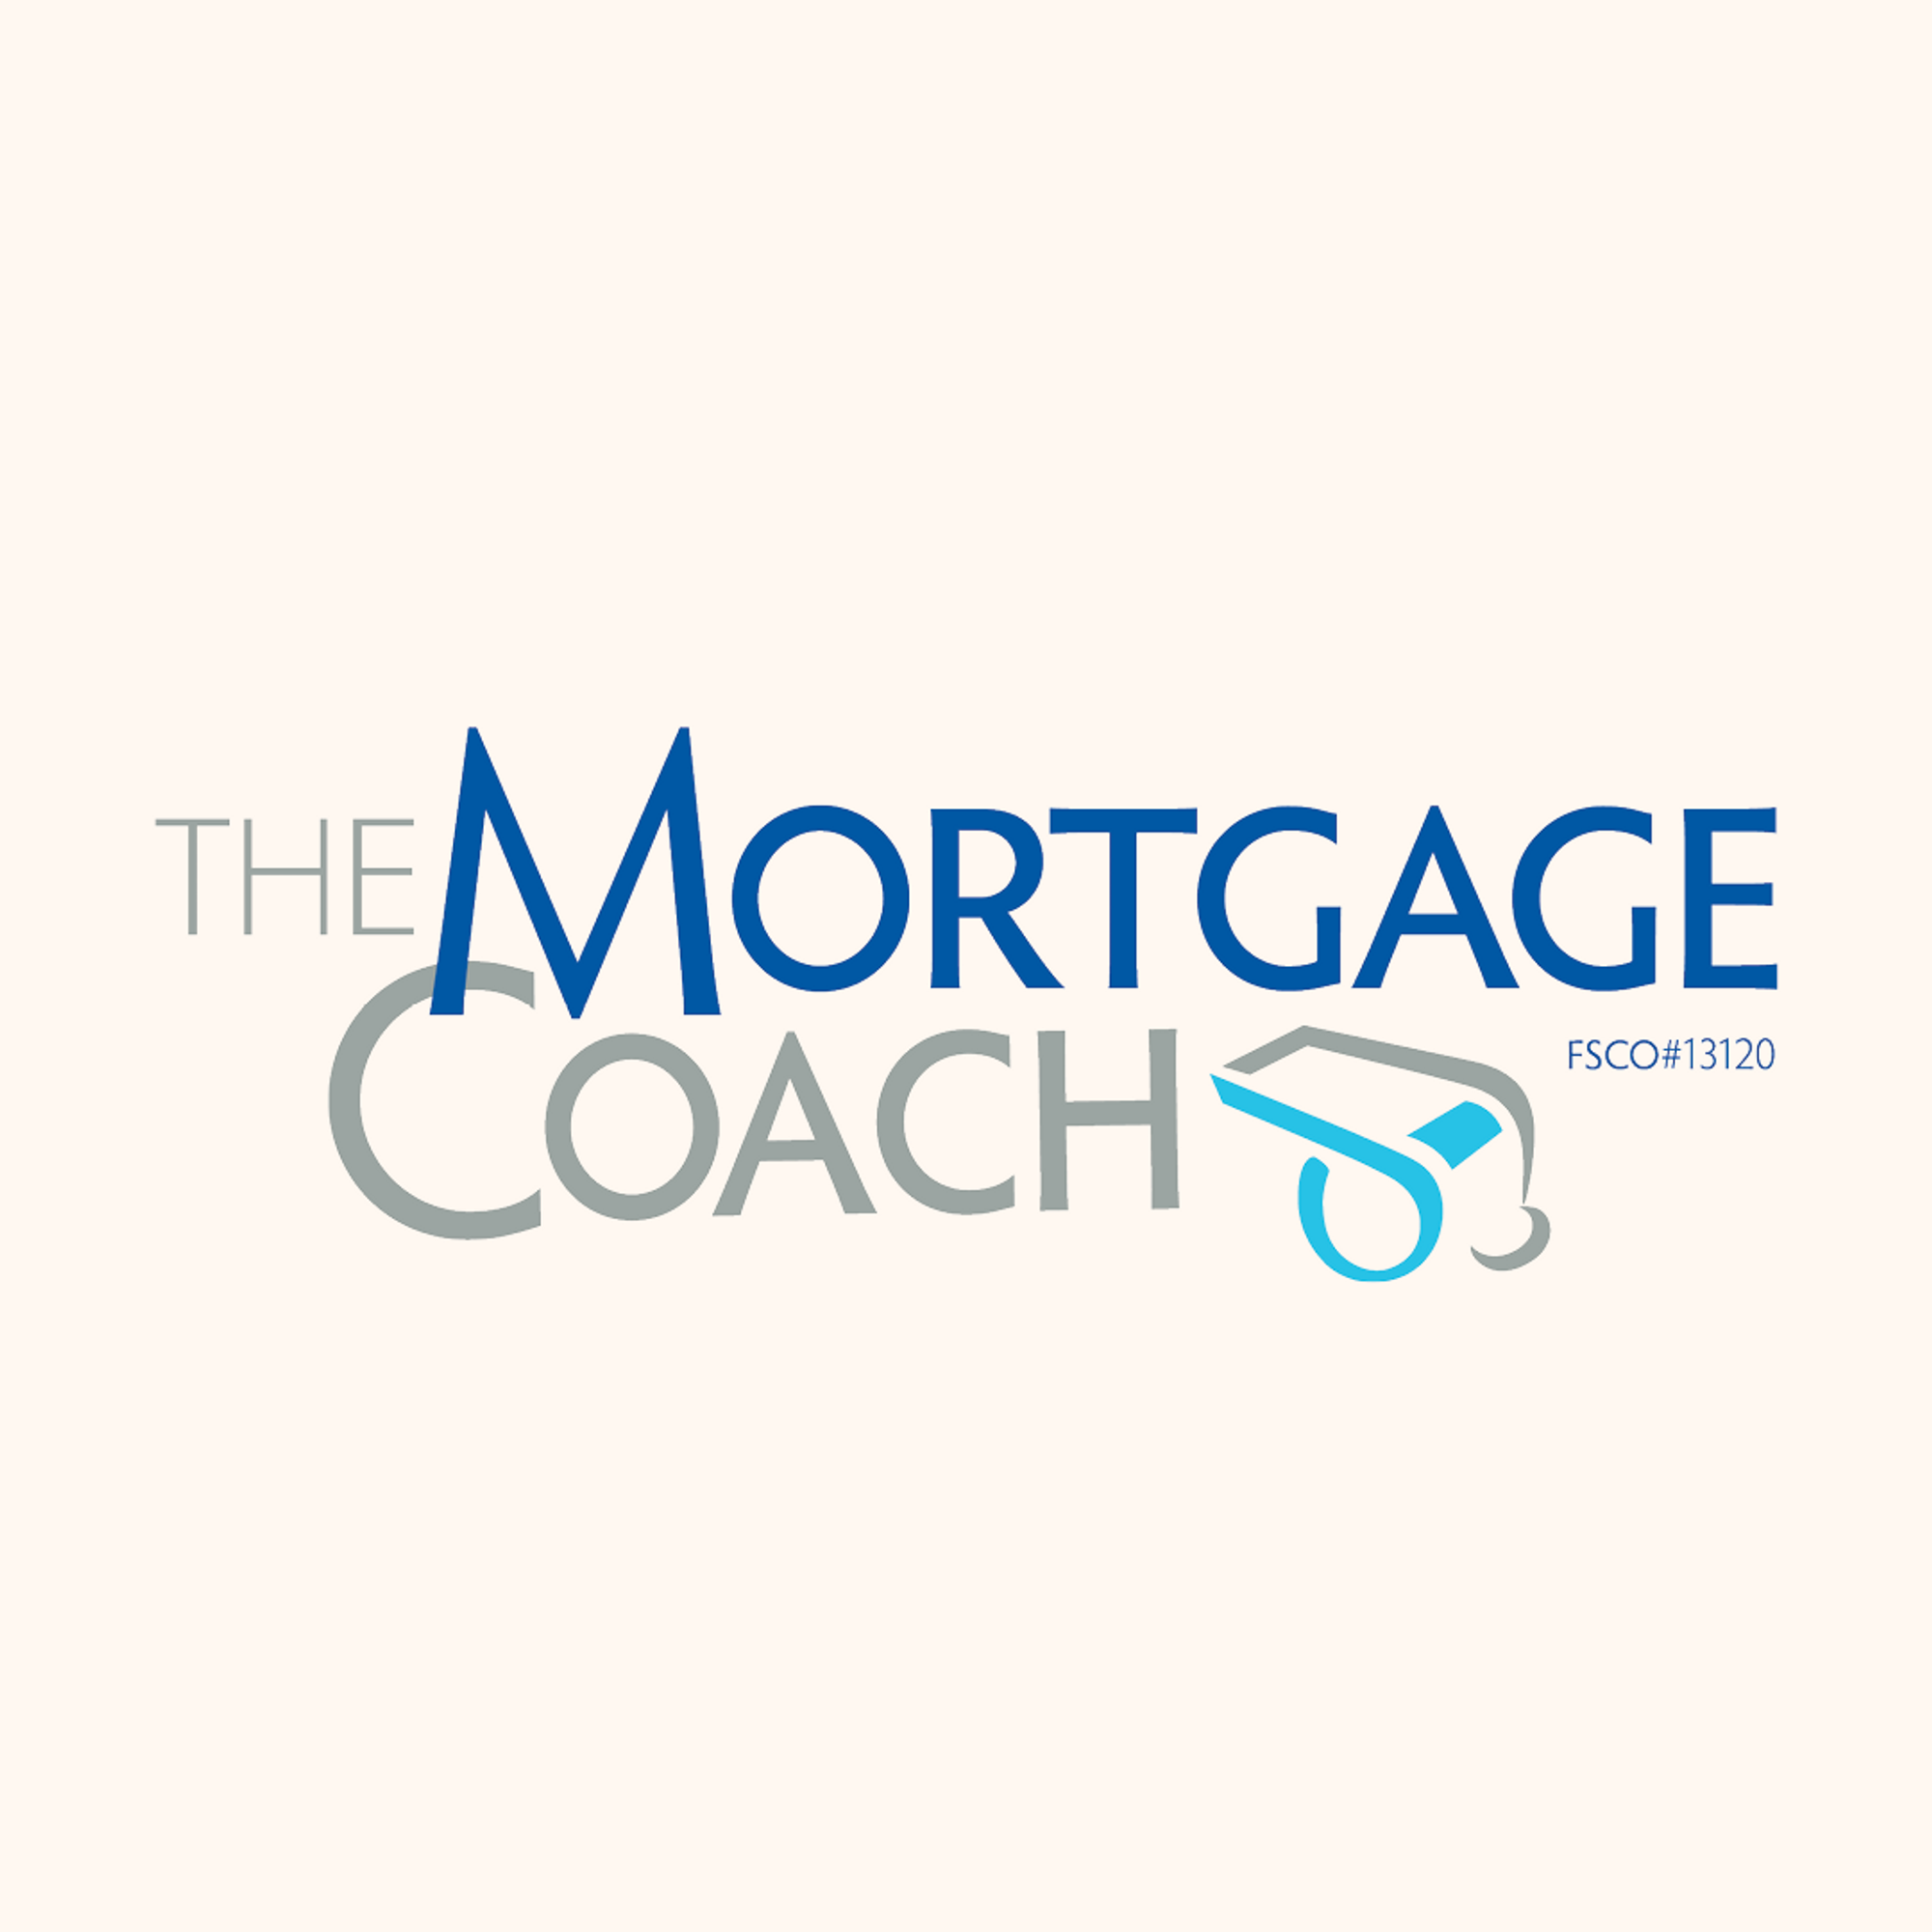 The Mortgage Coach